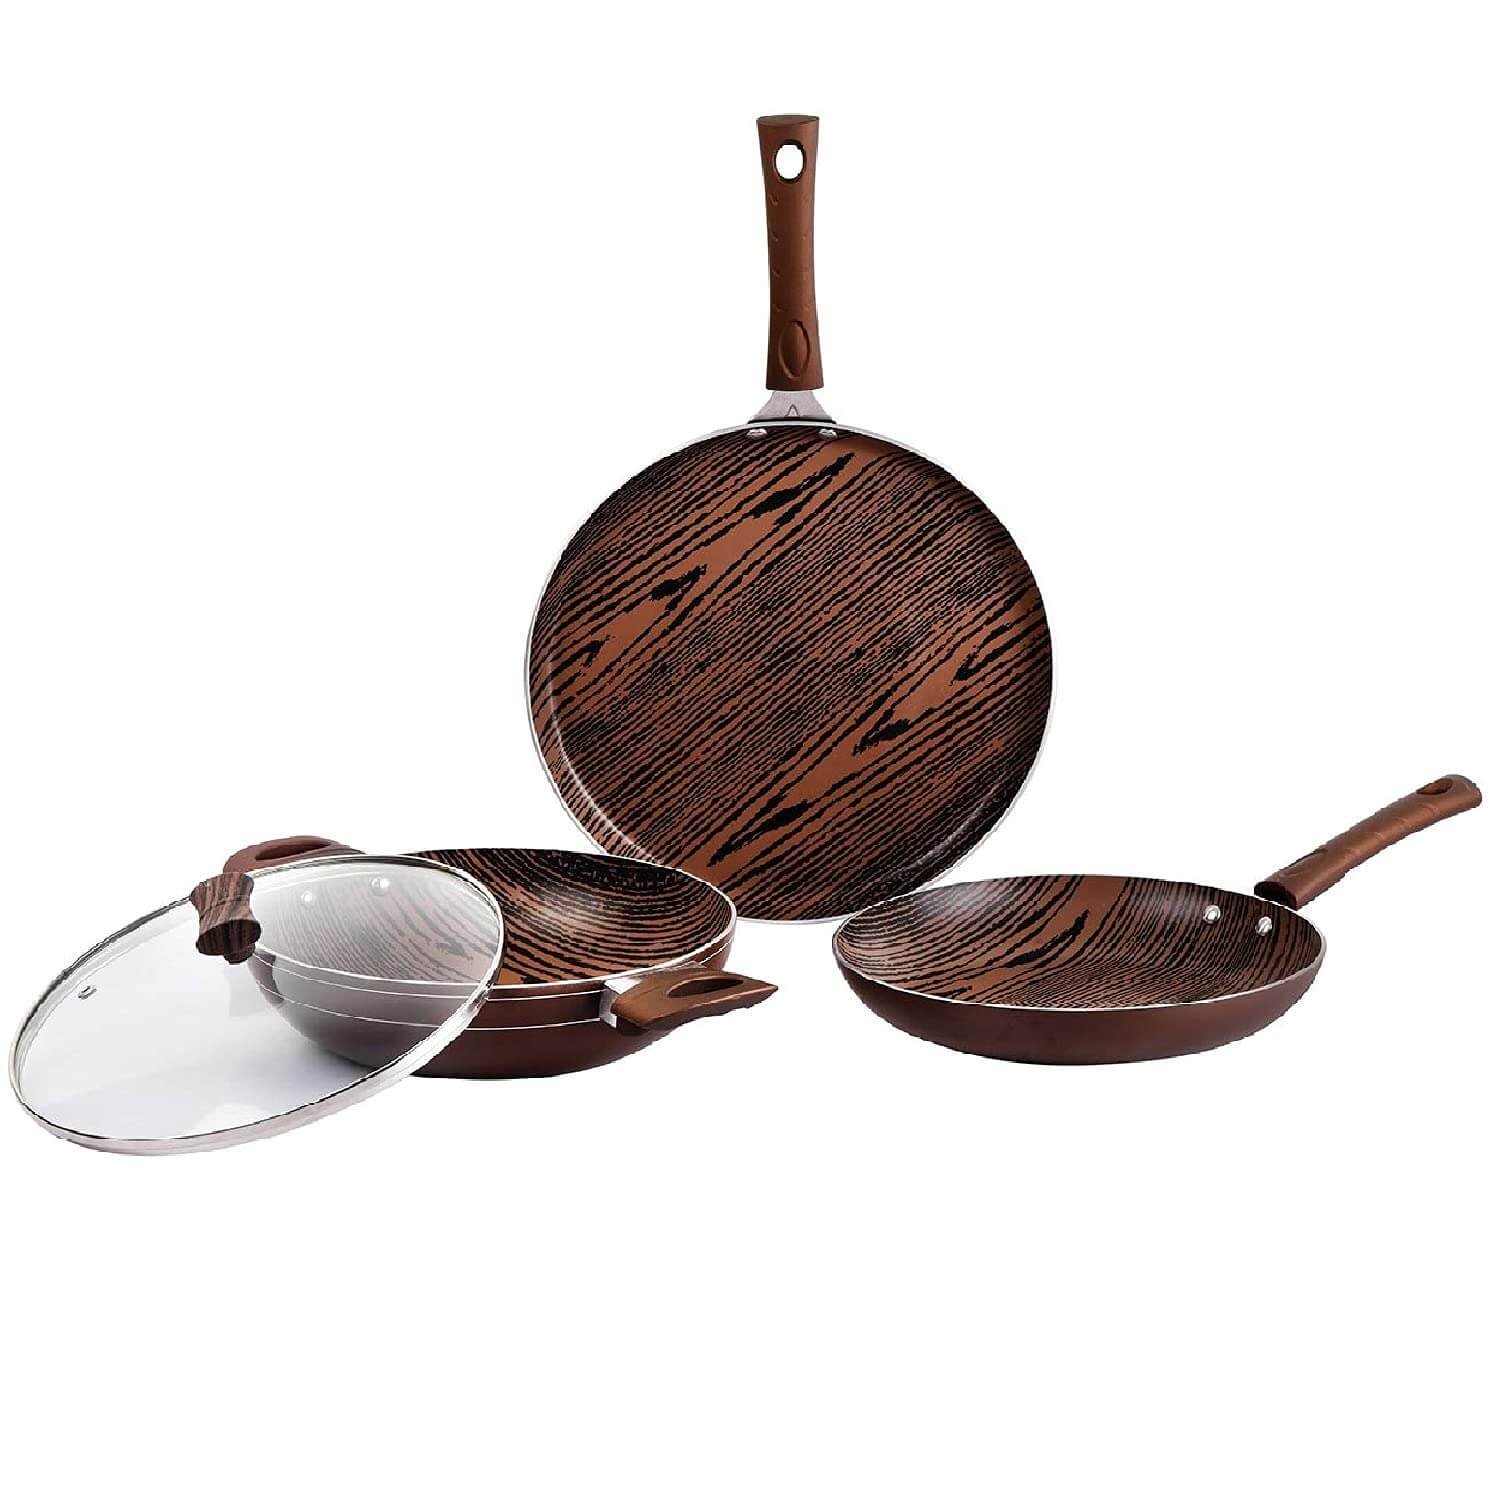 https://shoppingyatra.com/product_images/Cello Aluminium Induction Base Non-Stick Cookware Set, Brown, Woody1.jpg